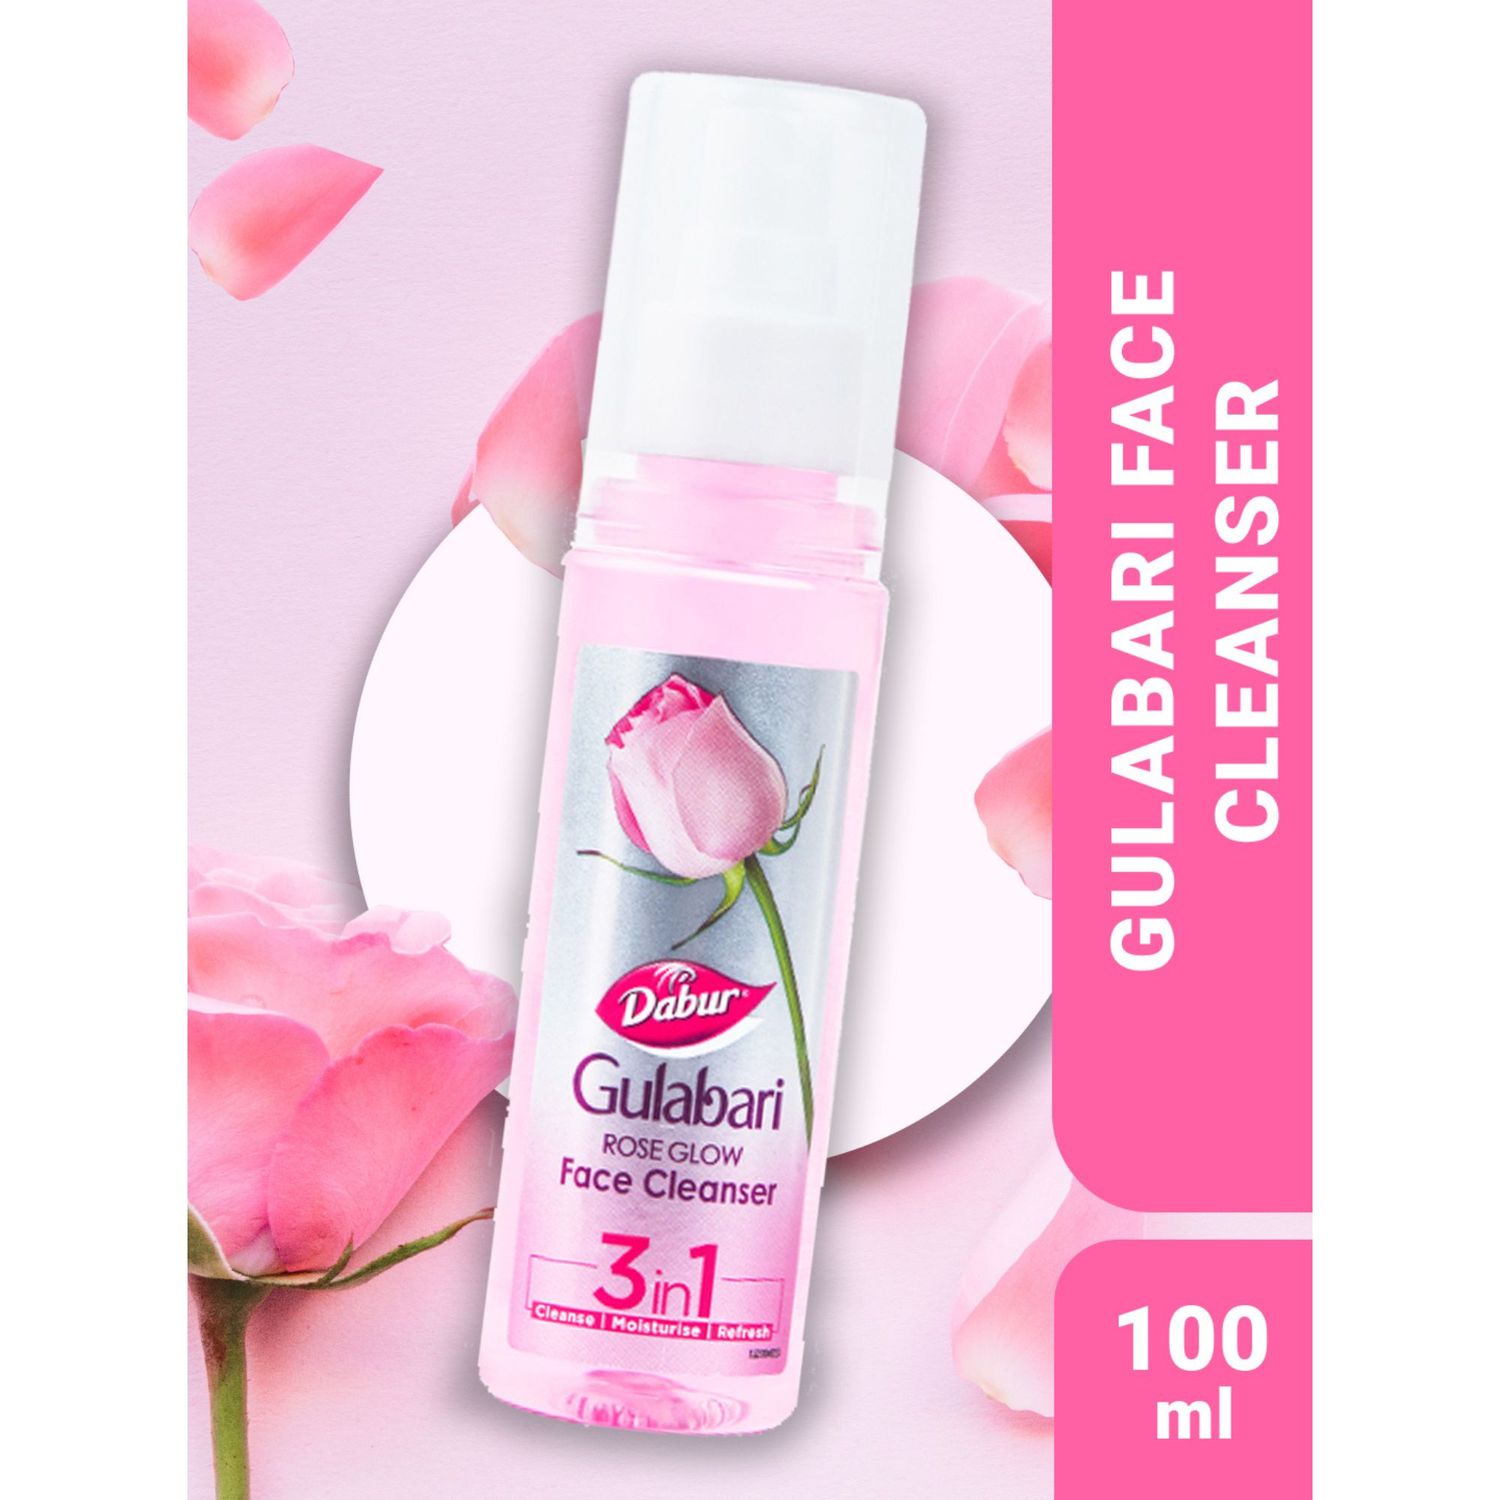 Buy Dabur Gulabari Rose Glow Face Cleanser - 100ml | For All Skin Types | 3 in 1 Cleanser | Cleaner, Balanced & Hydrated Skin - Purplle